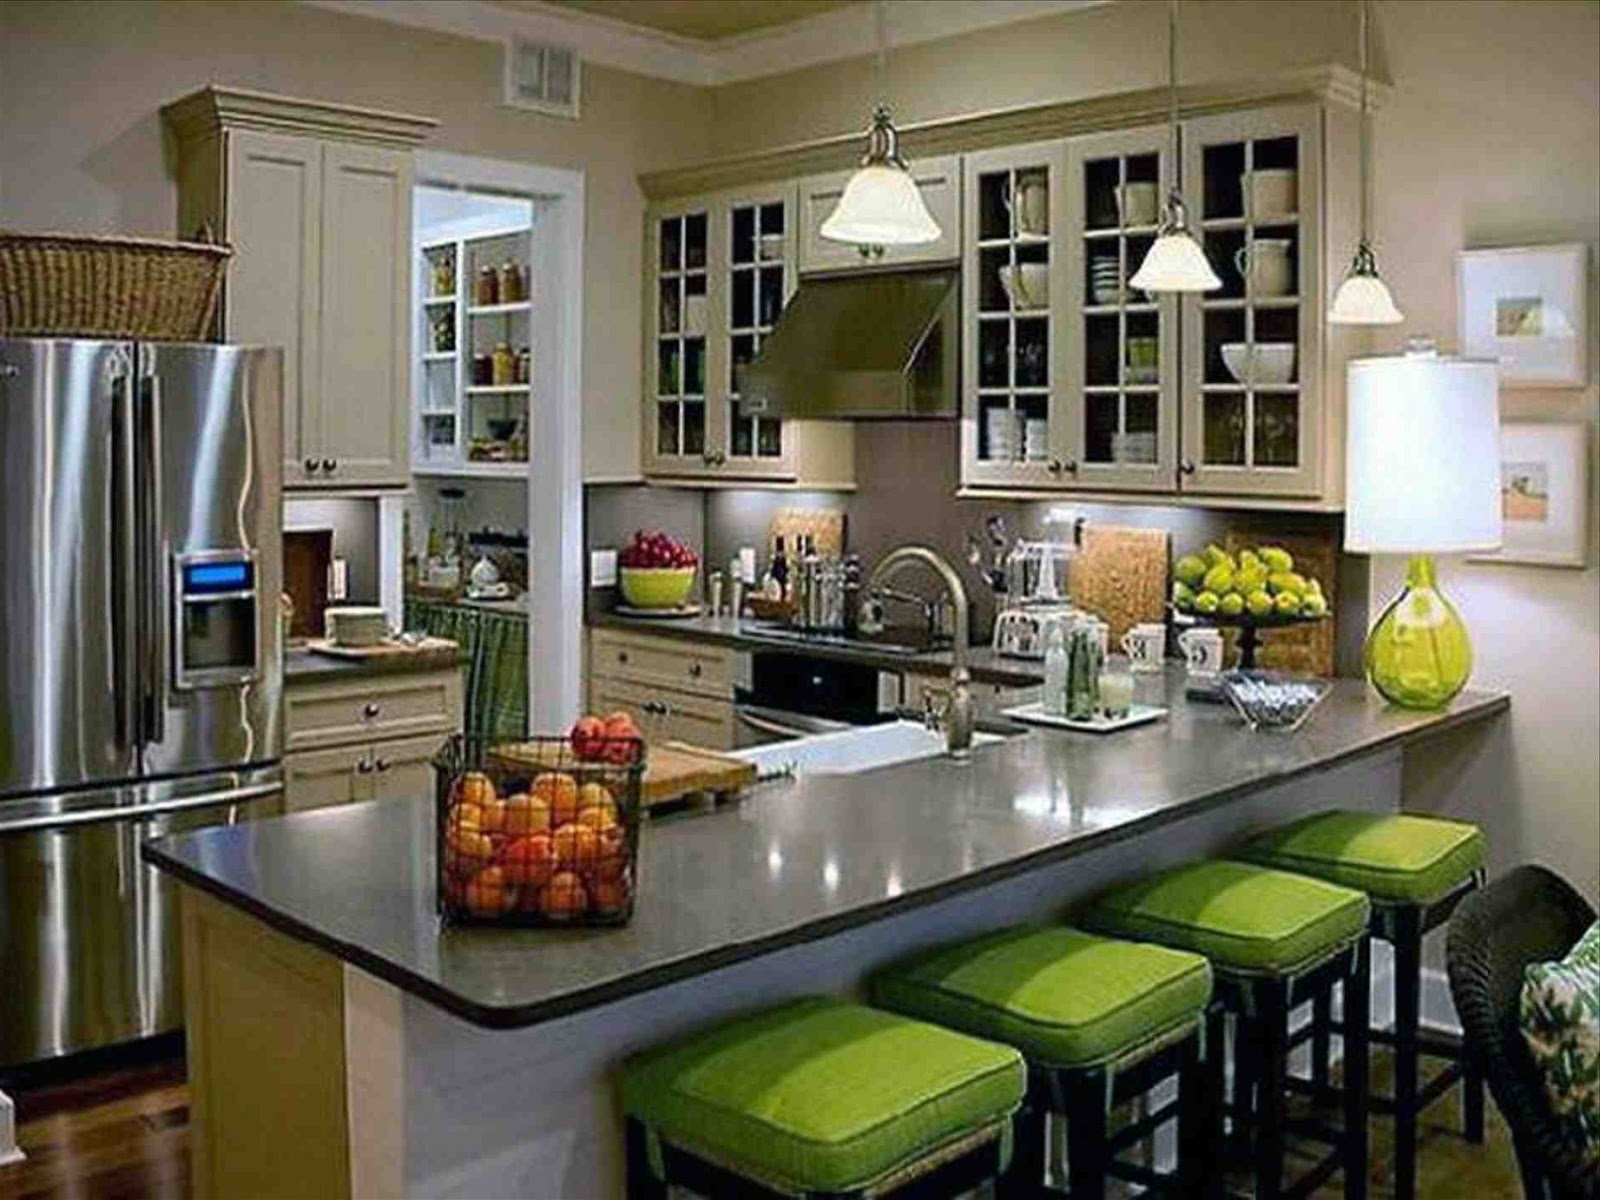 How To Accessorize A Kitchen Counter What To Put On Kitchen